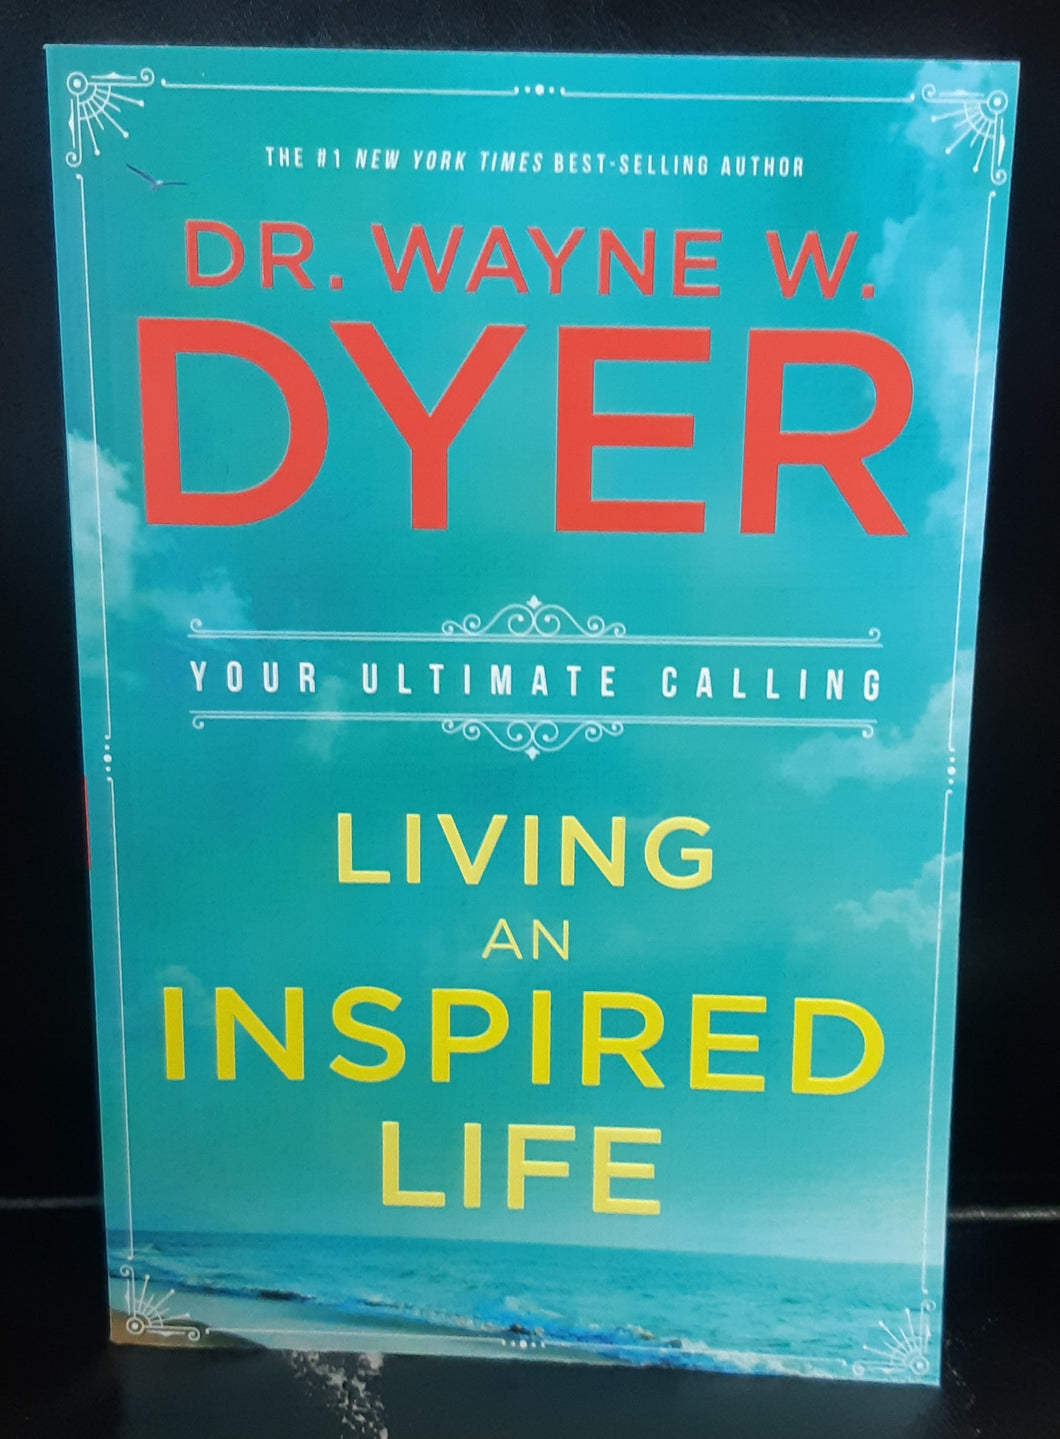 Living an Inspired Life: Your Ultimate Calling by Dr. Wayne W. Dyer